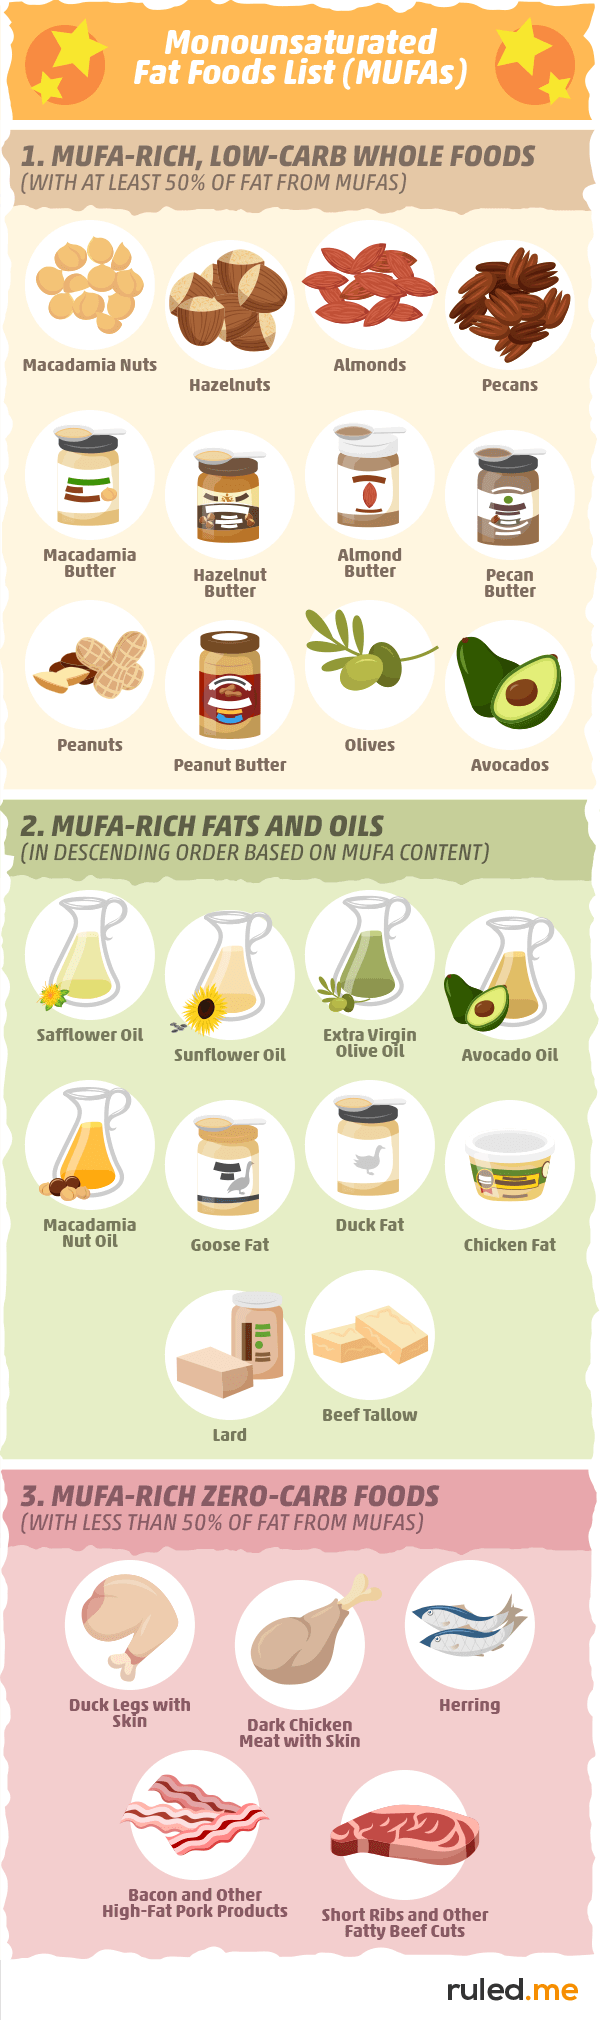 Monounsaturated Fat Food List